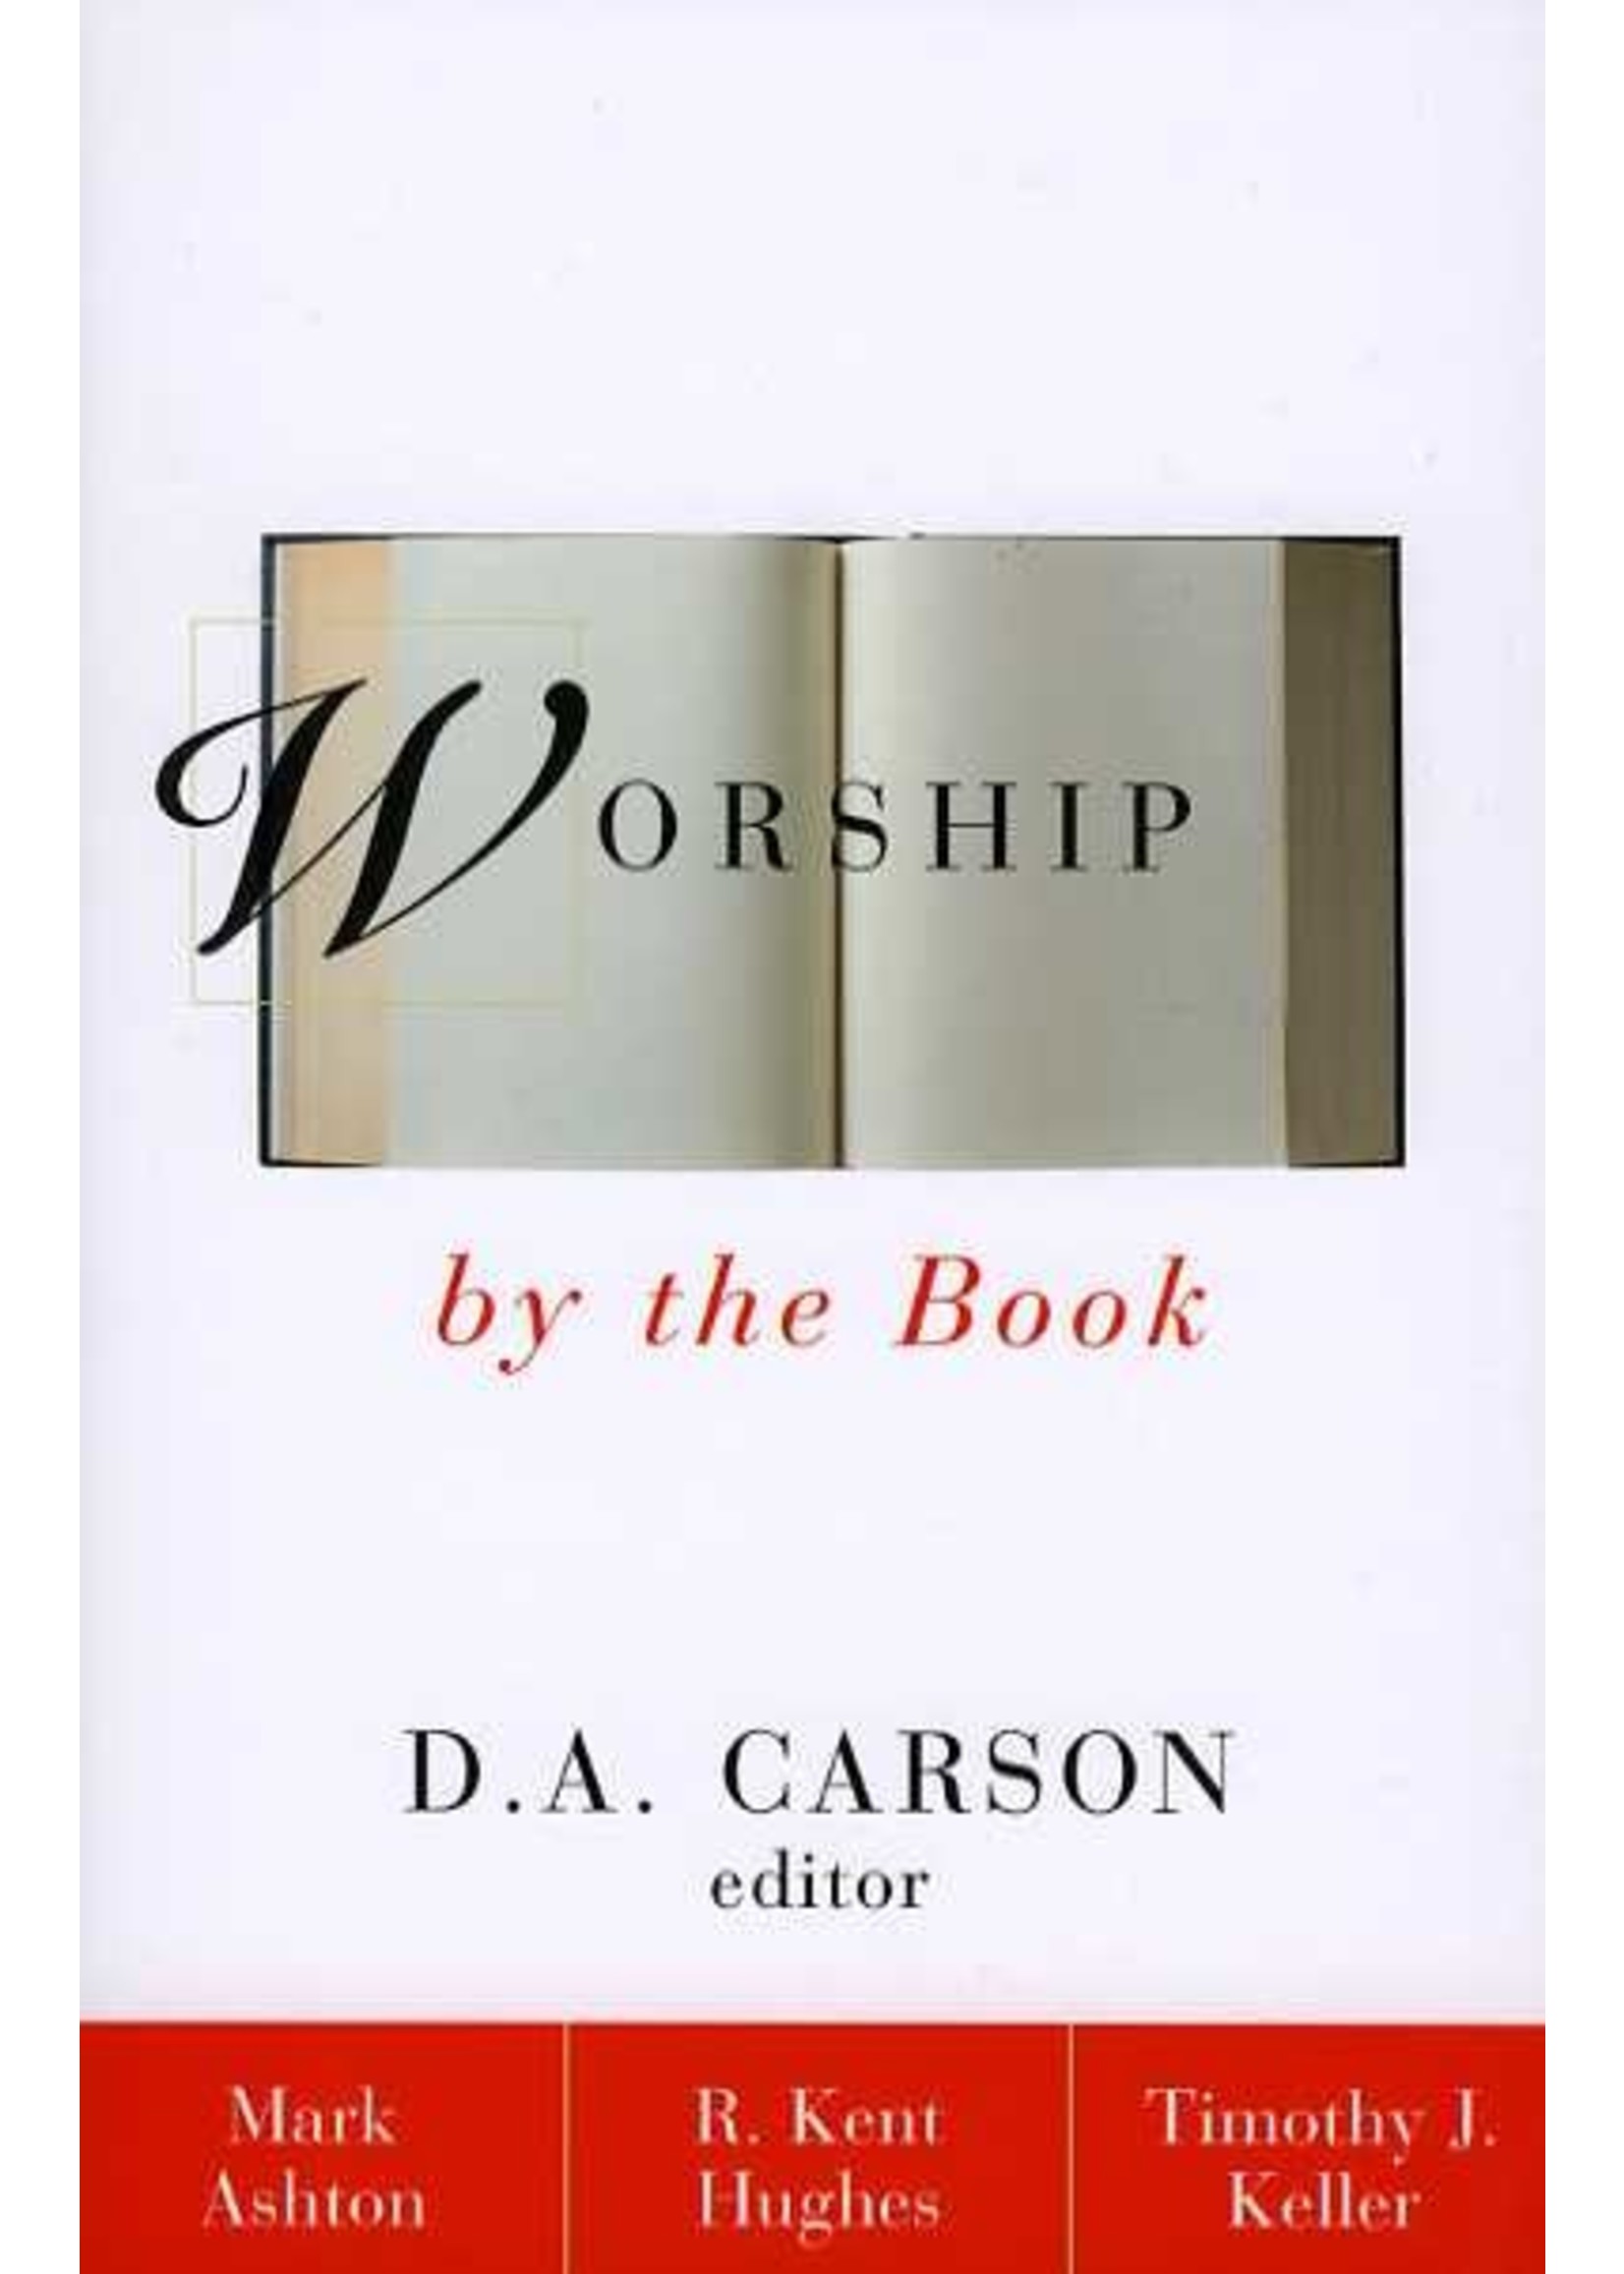 Zondervan Worship by the Book - D. A. Carson